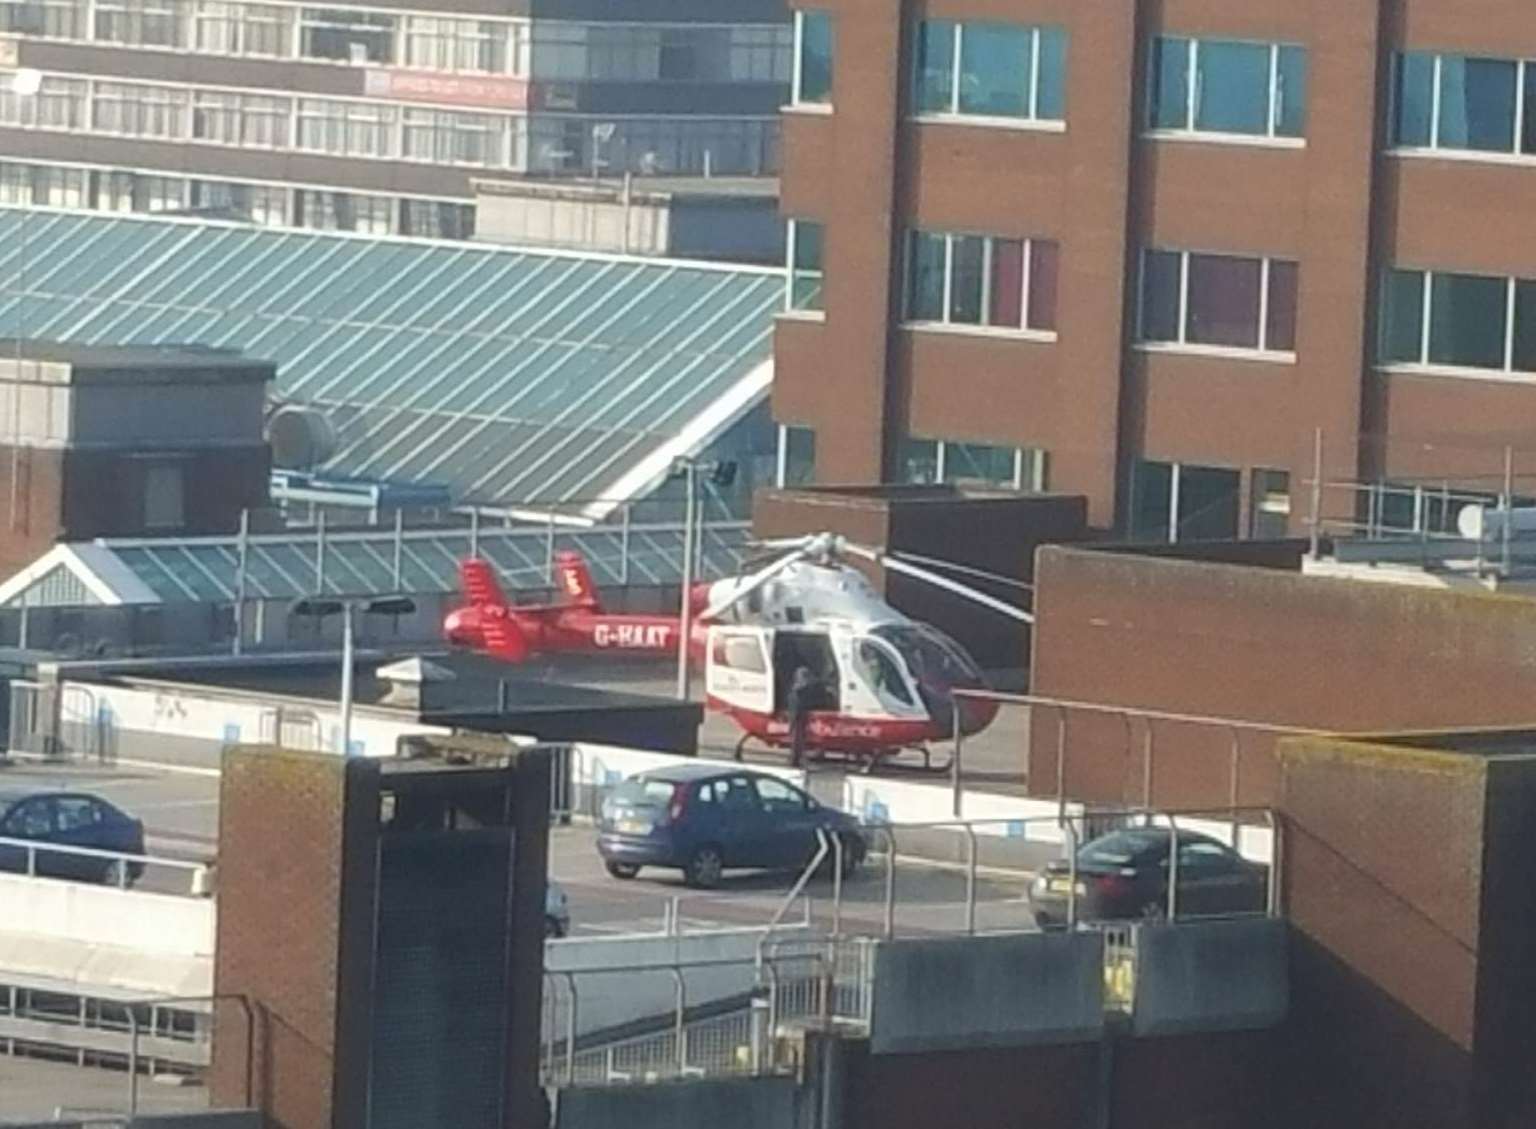 The air ambulance has landed on the roof of The Mall. Pic: Matthew J Scott